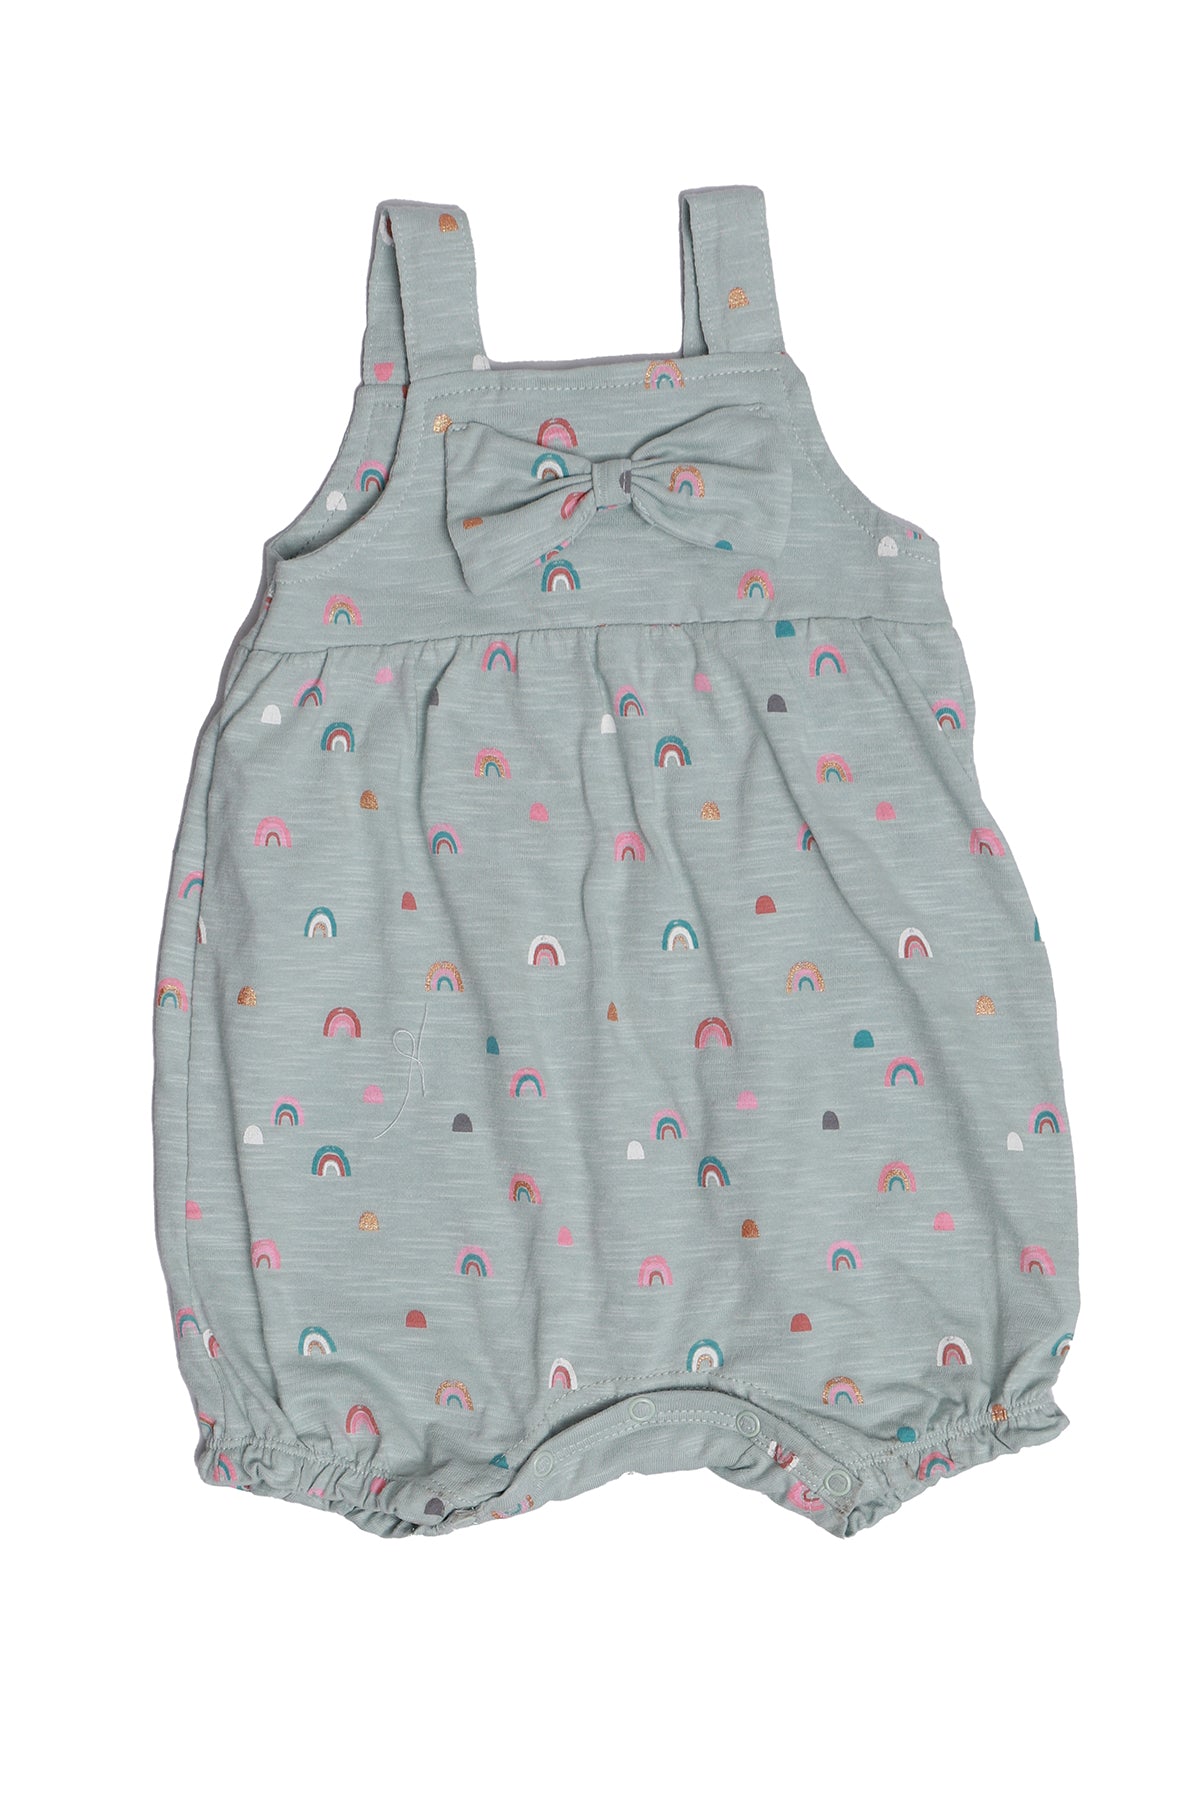 Ozone Baby Girls Sleeve Less Play Suit